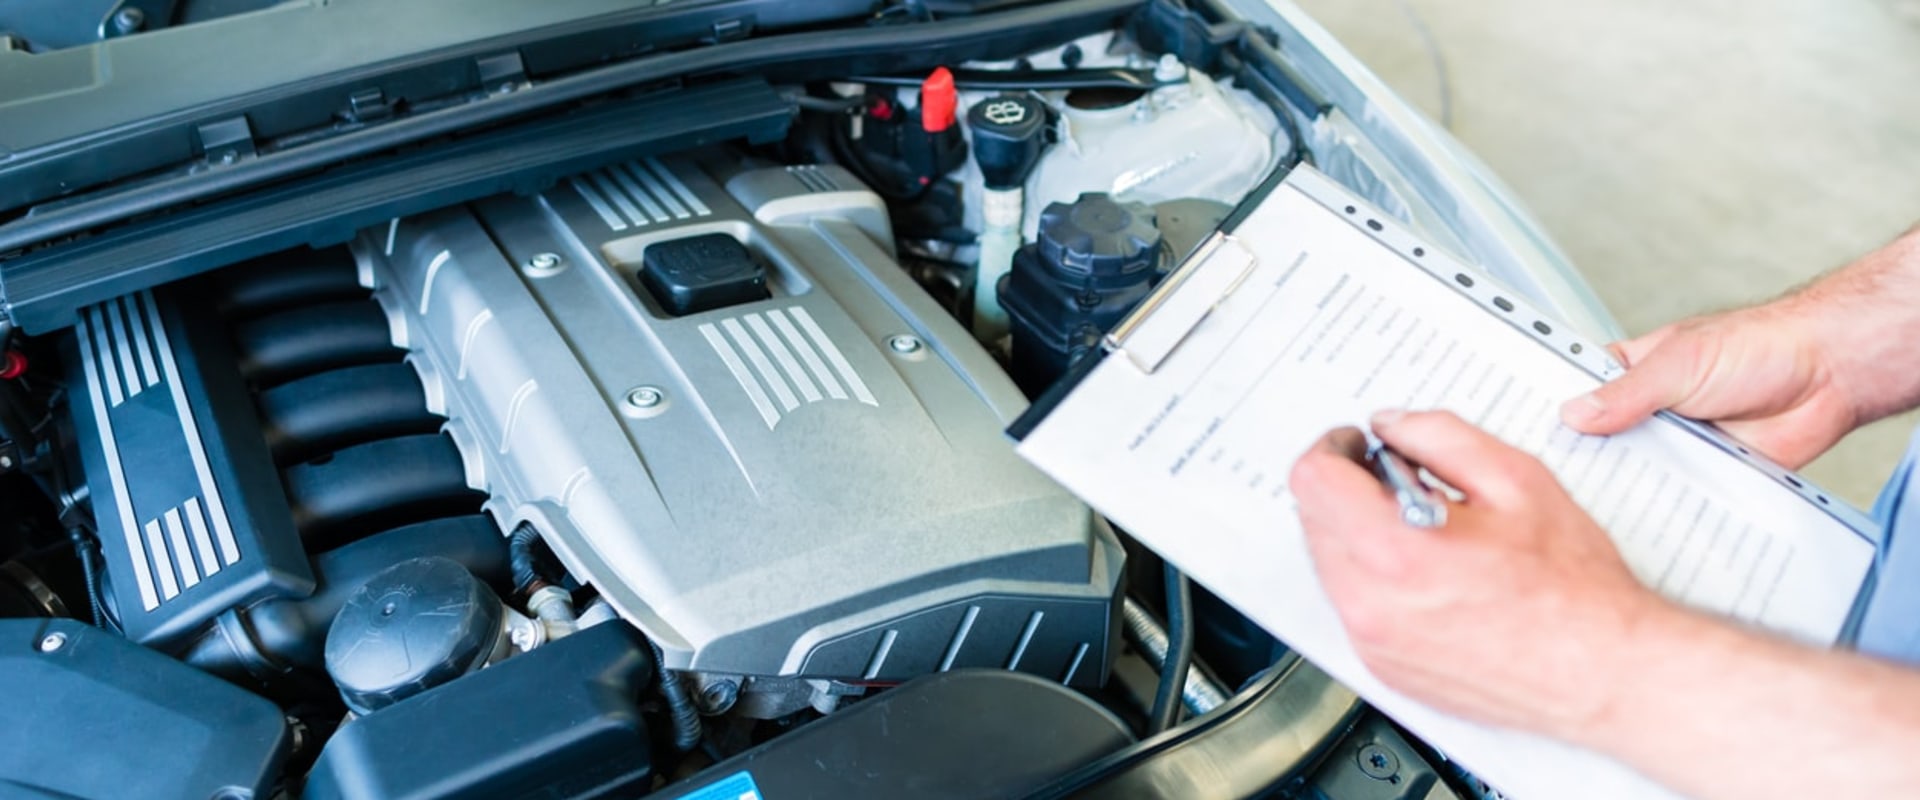 Vehicle Safety Inspection Checklist